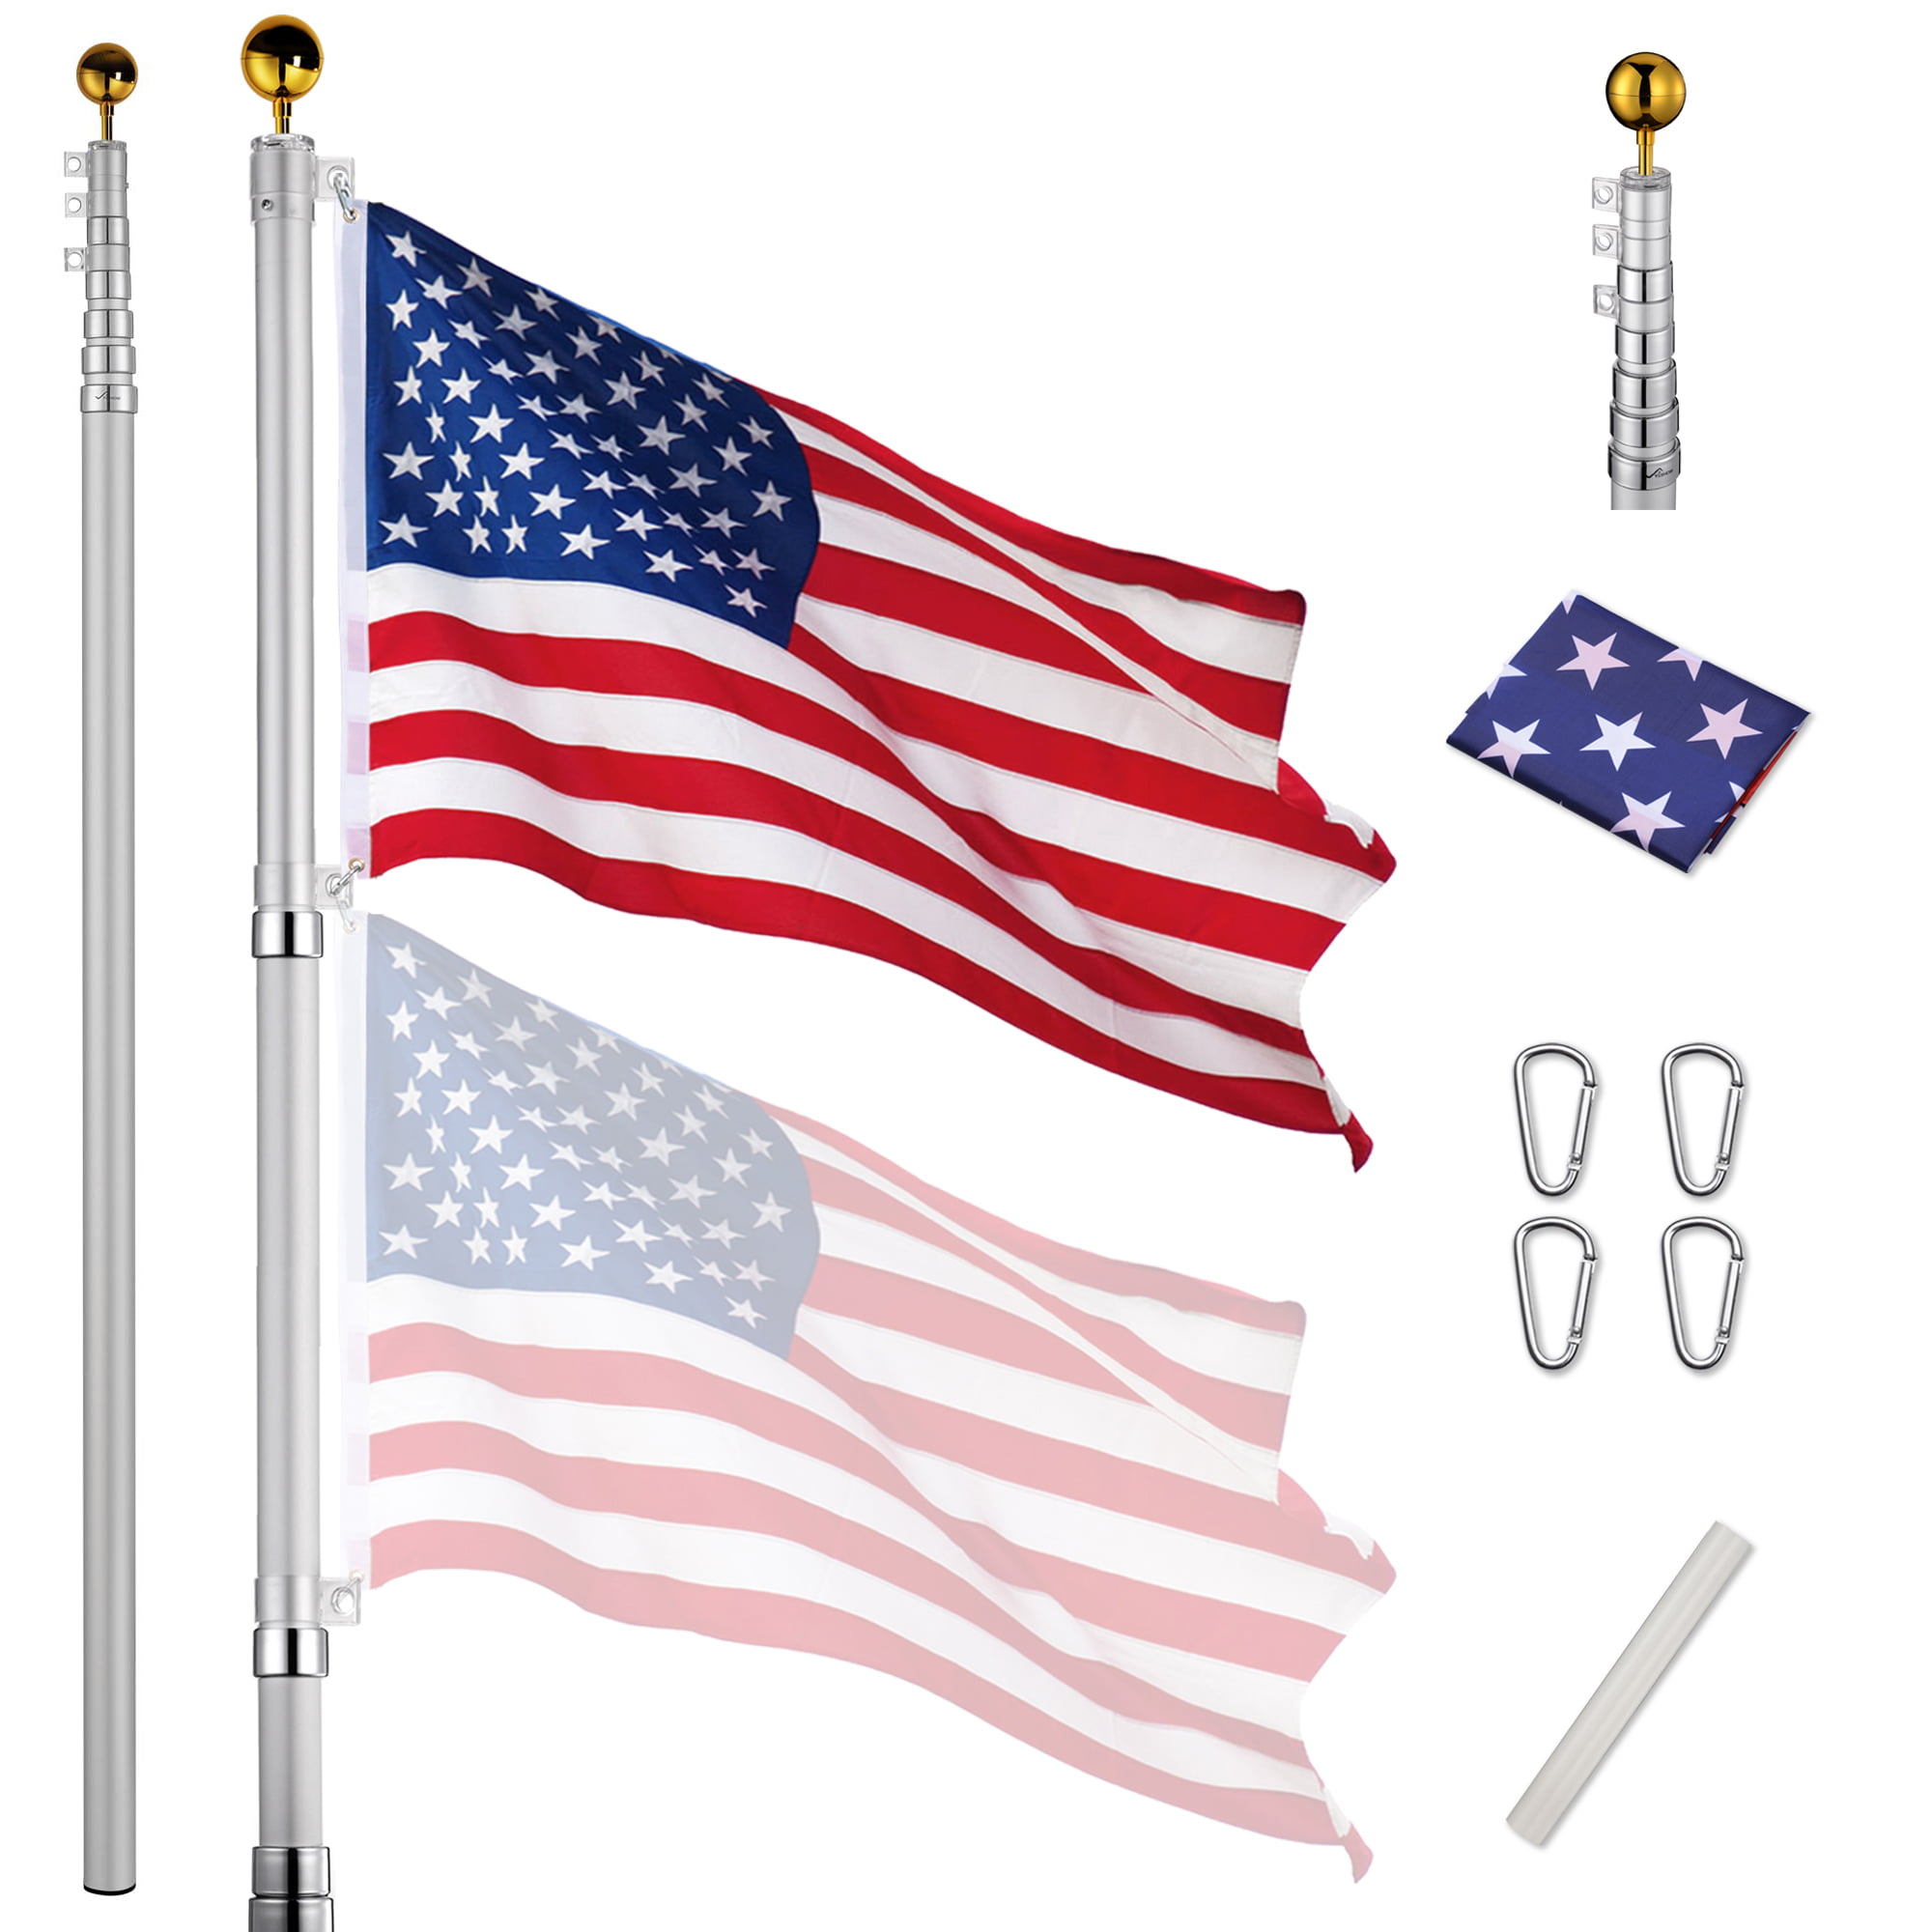 SPECIAL 28' FT FLAG POLE TIRE MOUNT & TWO 3' x 5' FLAGS fiberglass telescoping 